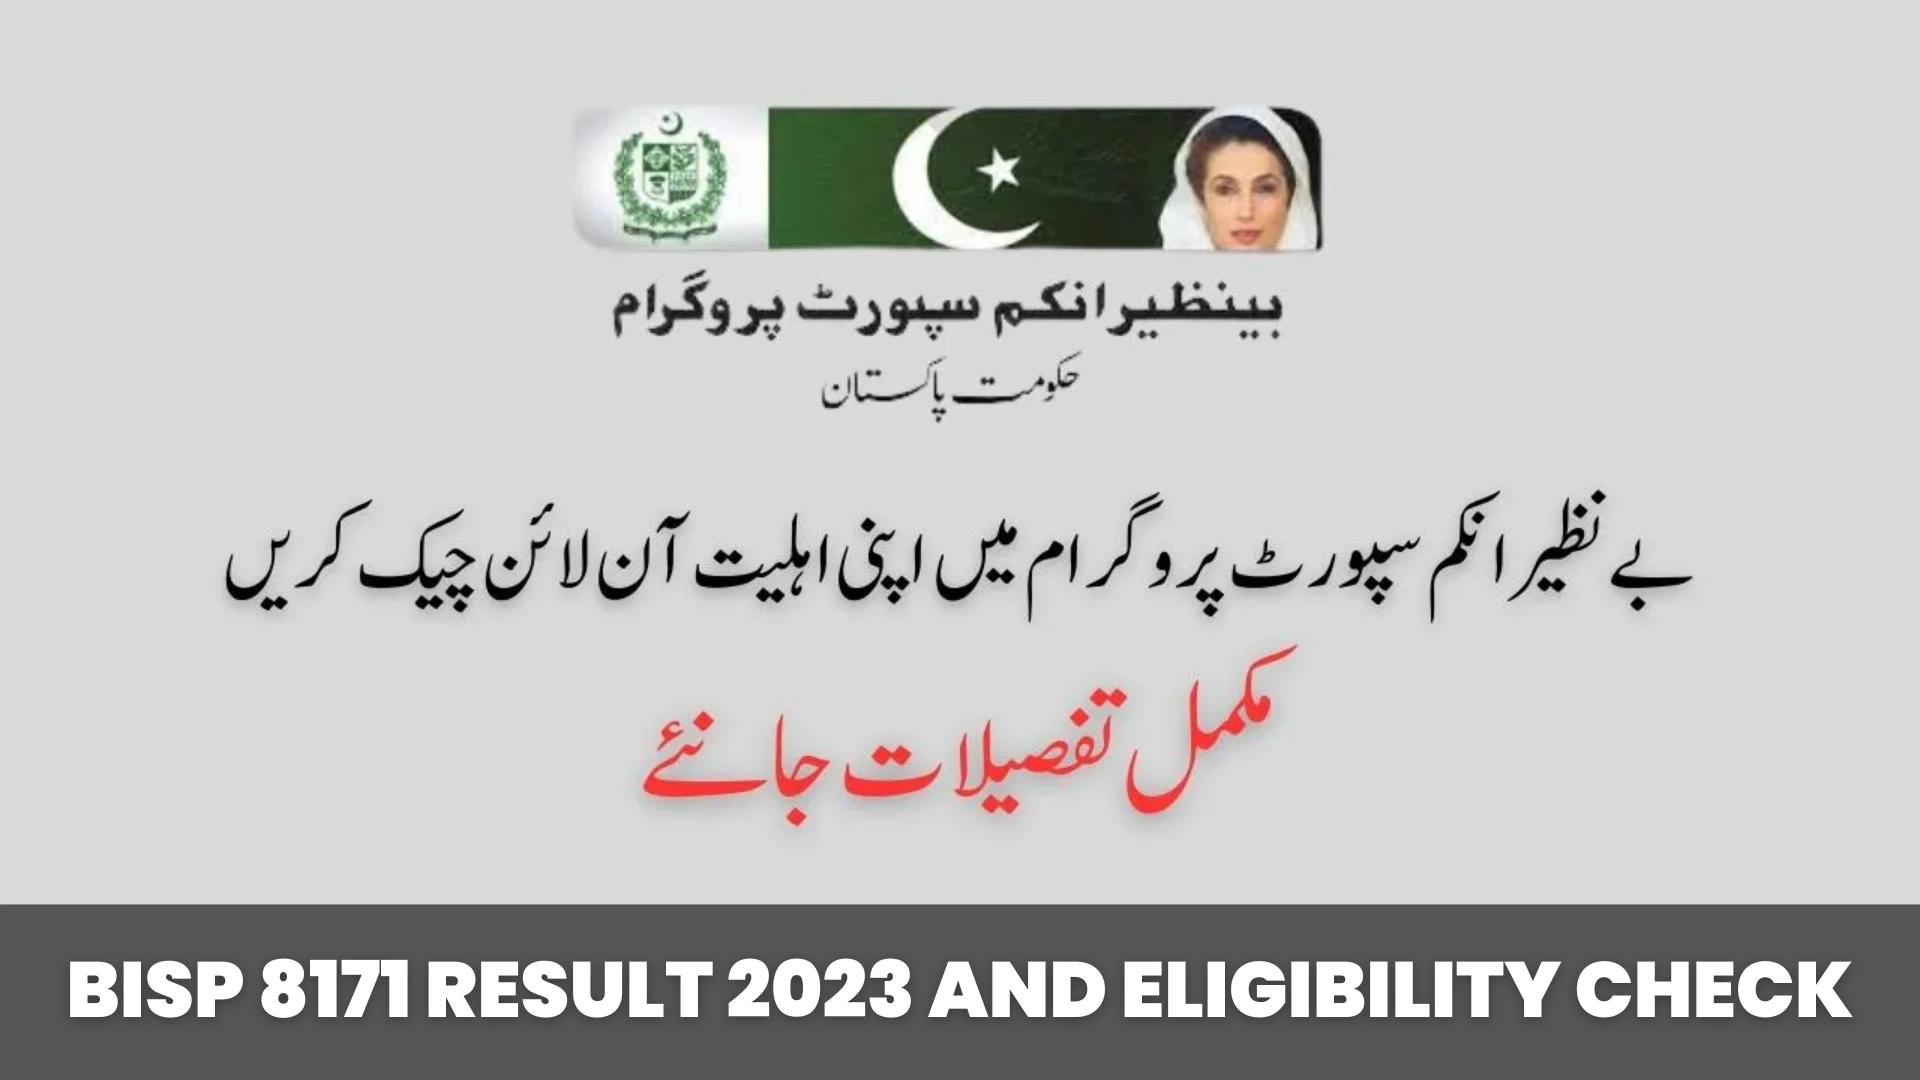 BISP 8171 Result 2023 and Eligibility Check